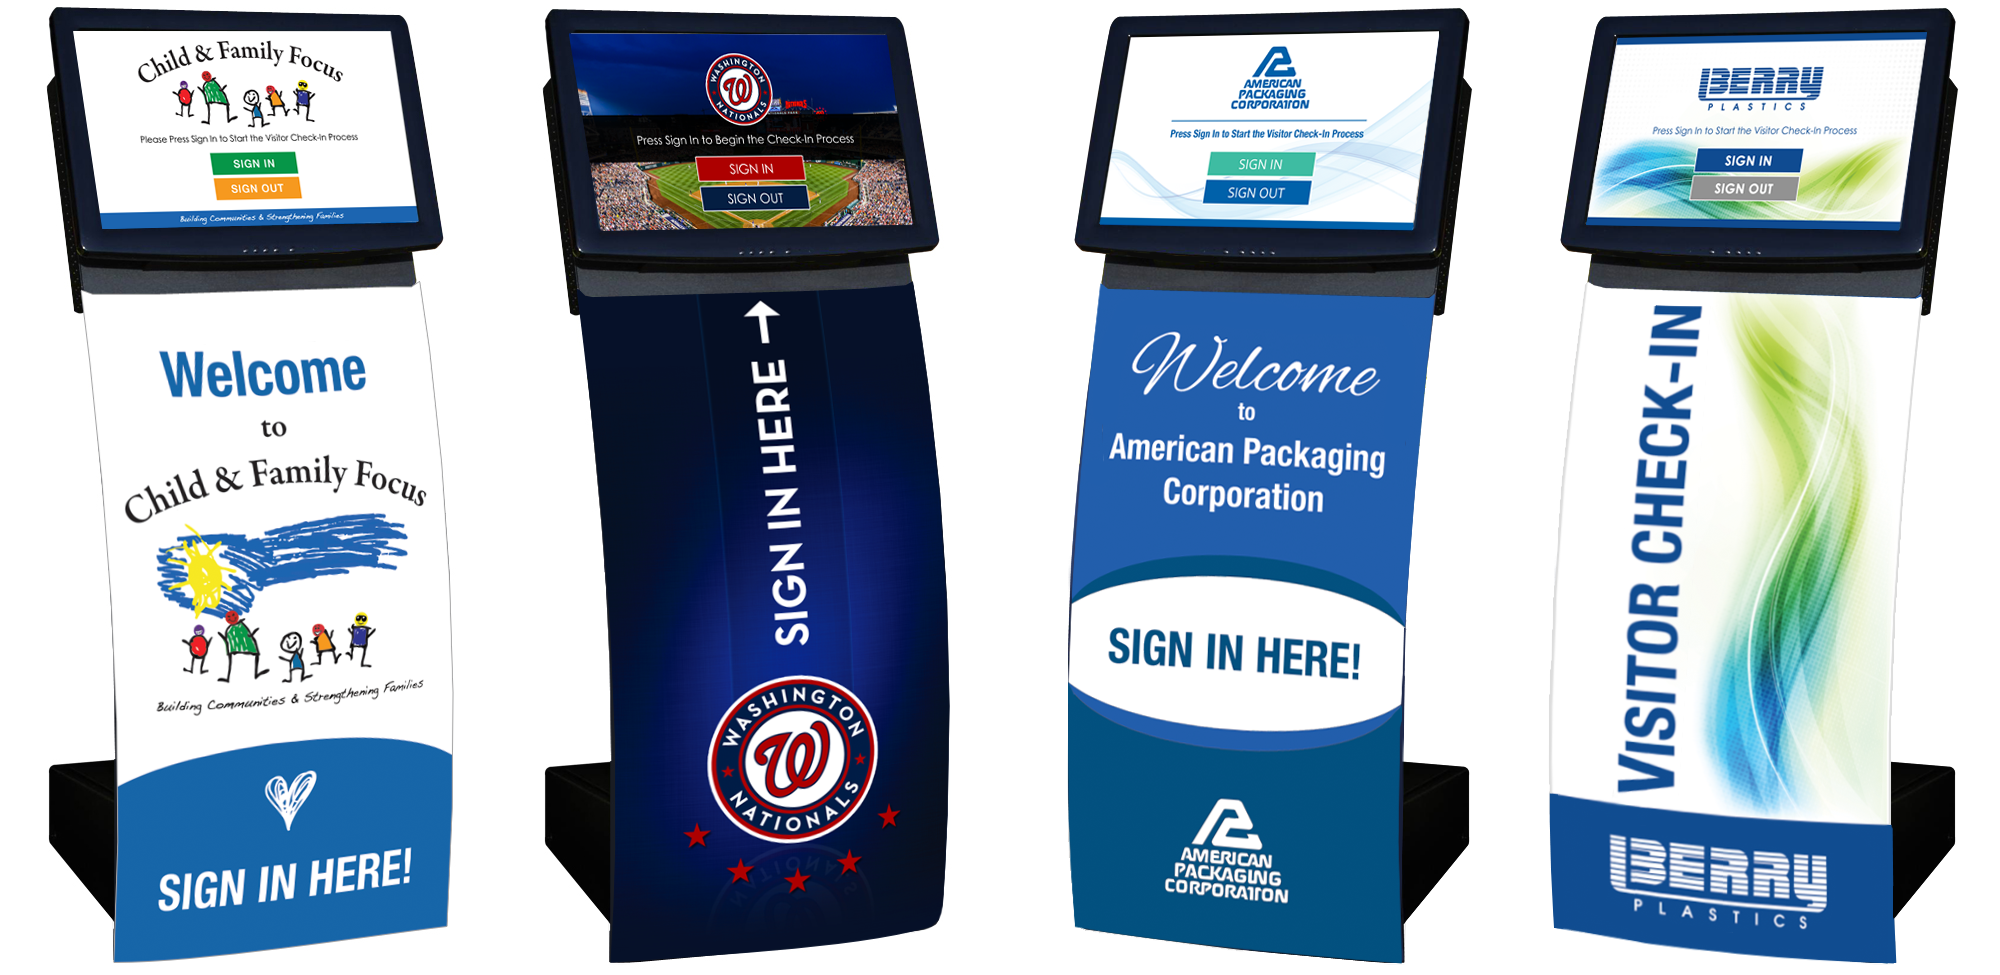 Modern, curved visitor management self check-in kiosks